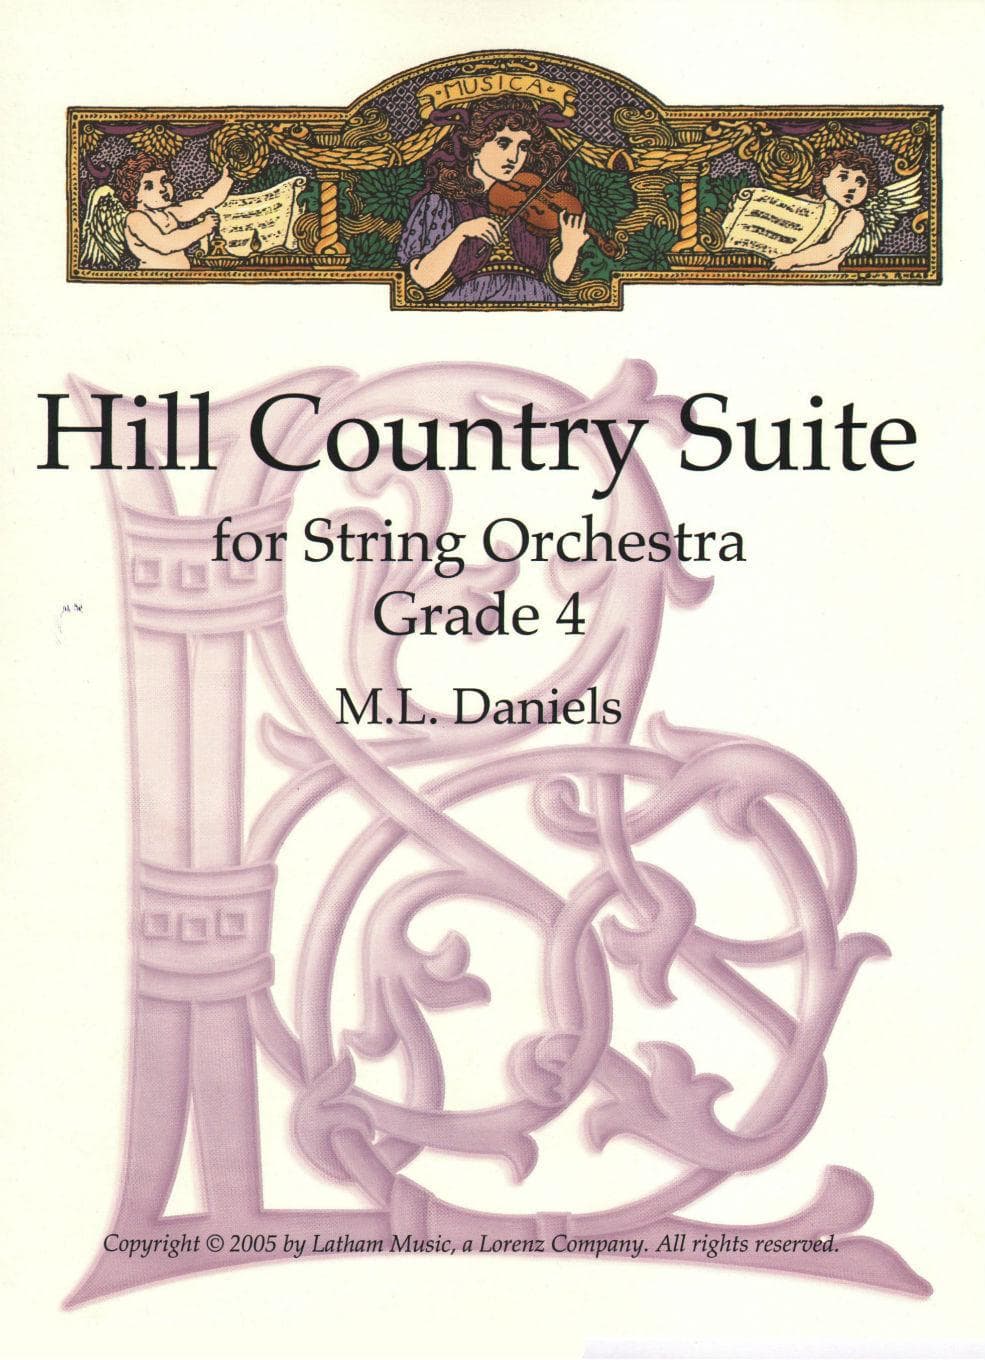 Daniels, ML - Hill Country Suite for String Orchestra Grade 4 - Score and Parts - Latham Edition